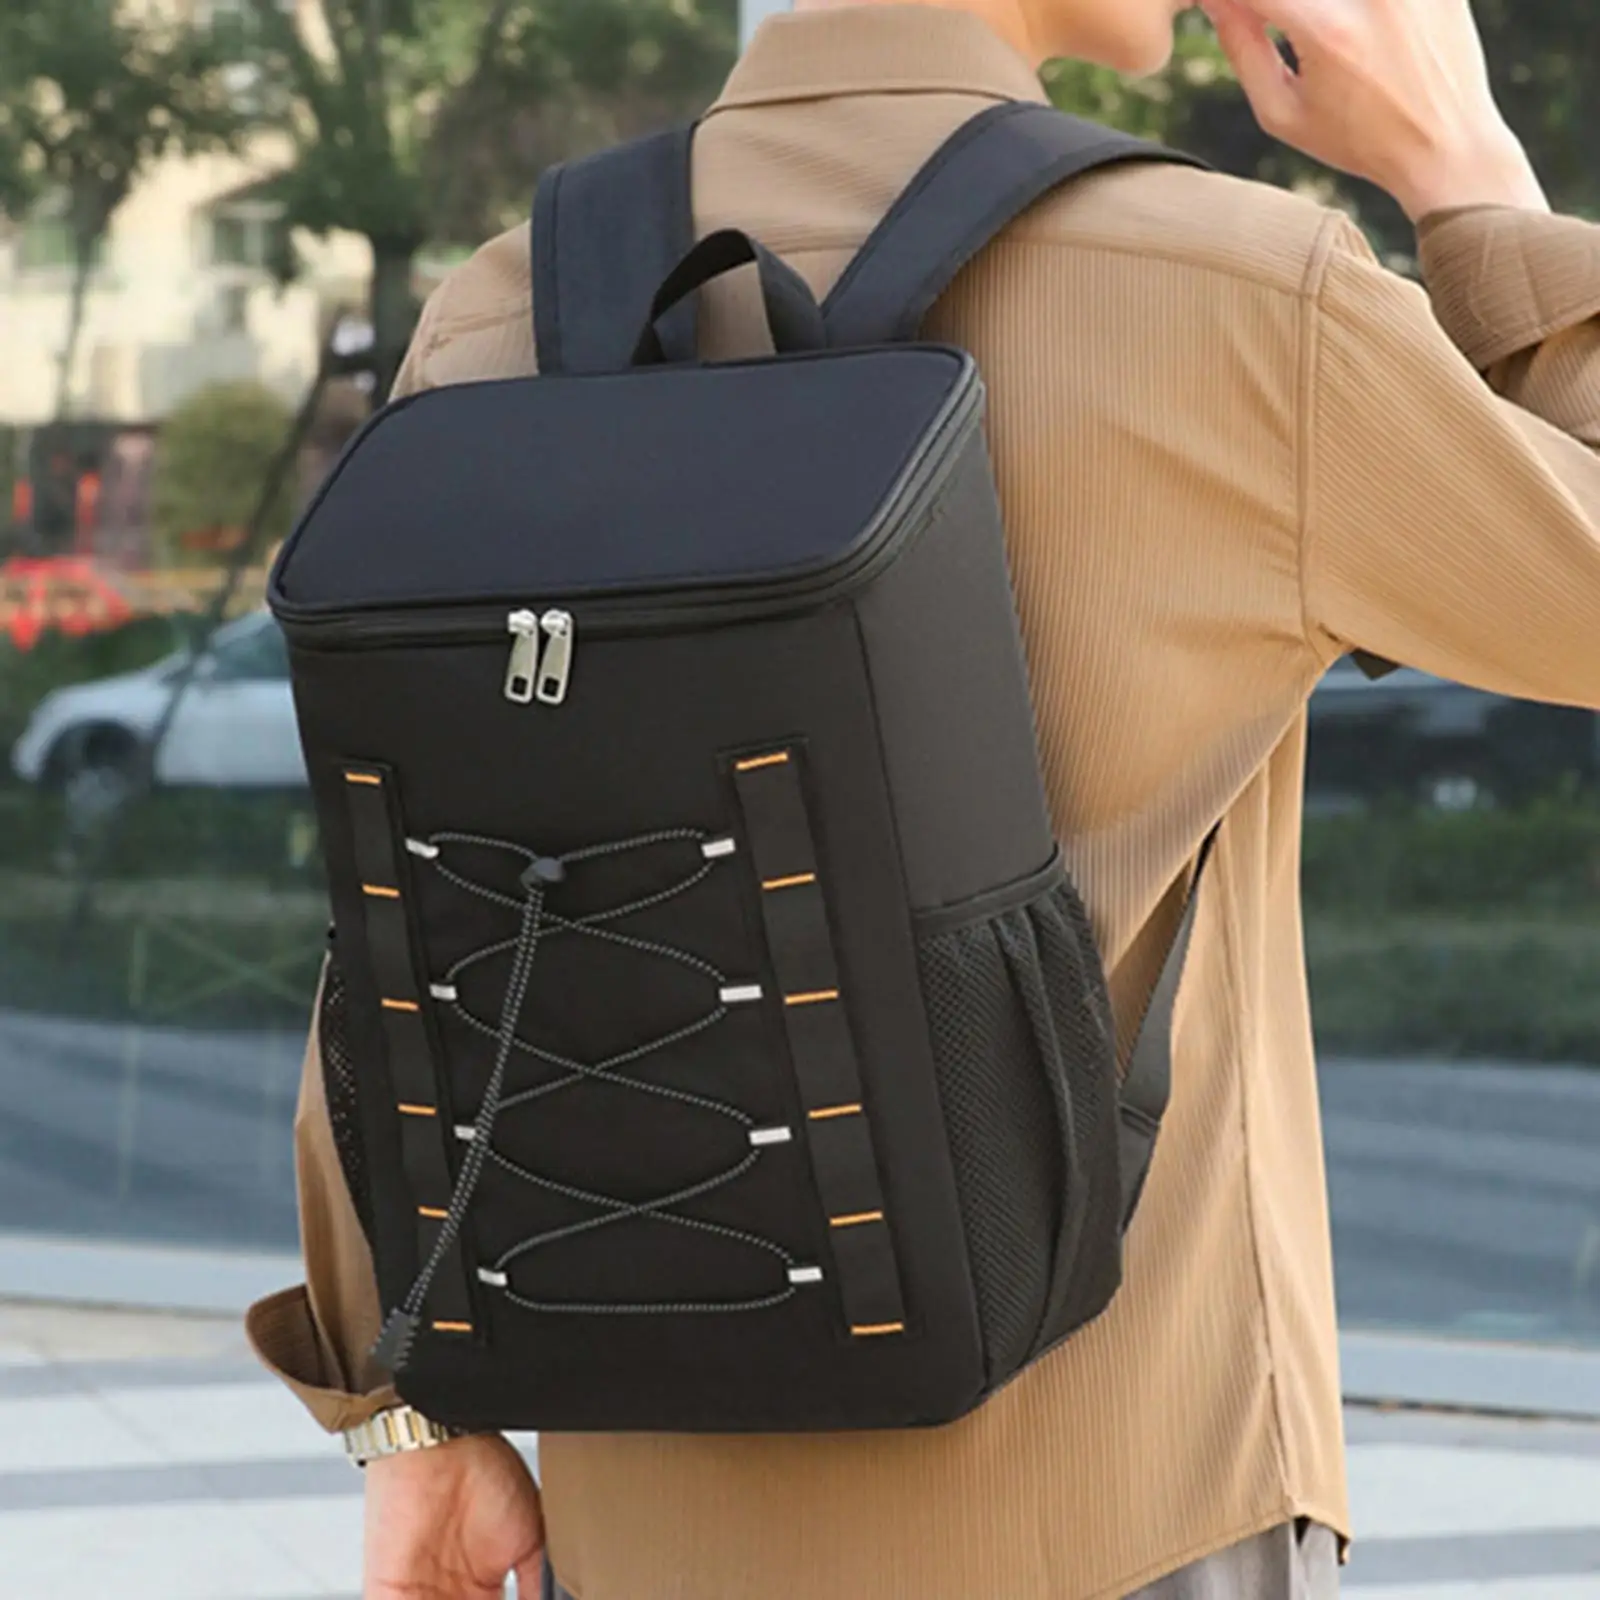 Outdoor Picnic Bag Thermal Bag Men Women Beer Pouch with Side Pockets Insulated Backpack Cooler Bag for Camping Work Lunch